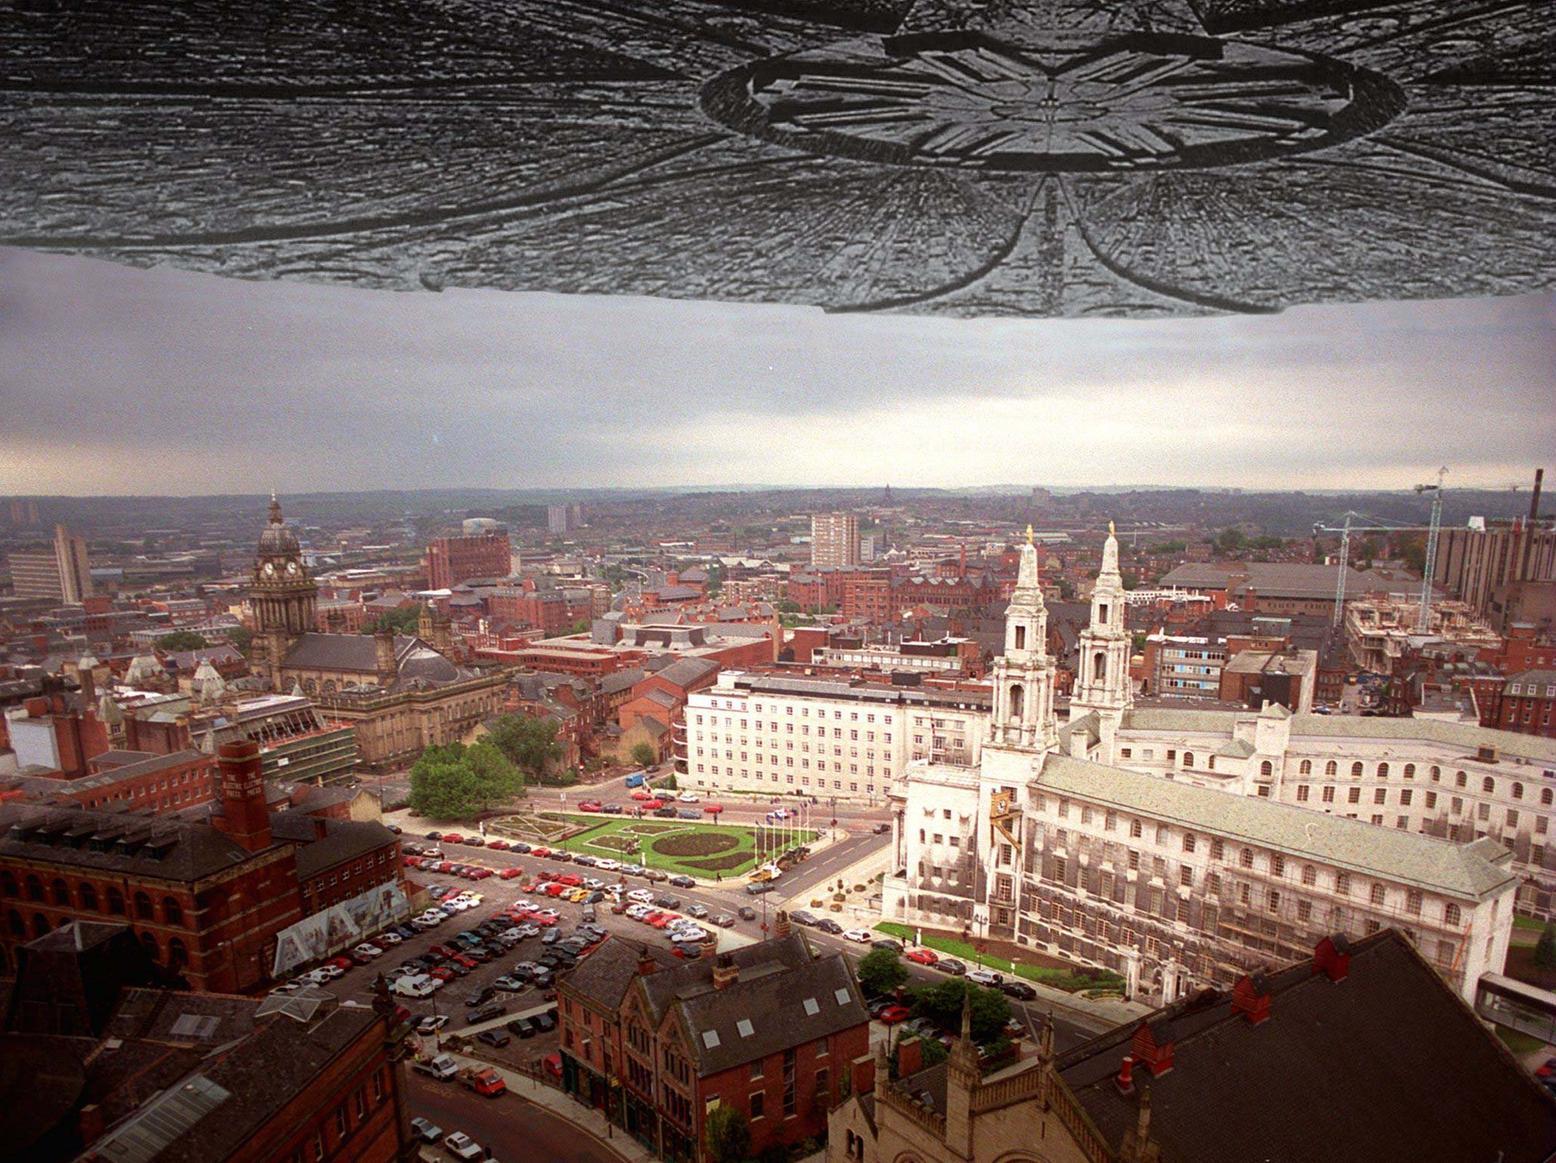 This is what the giant alien spaceship from the blockbusting film "Independence Day" might look like over Leeds Civic Hall, thanks to computer wizardary. The film was being shown locally up to 16 times a day in August 1996.